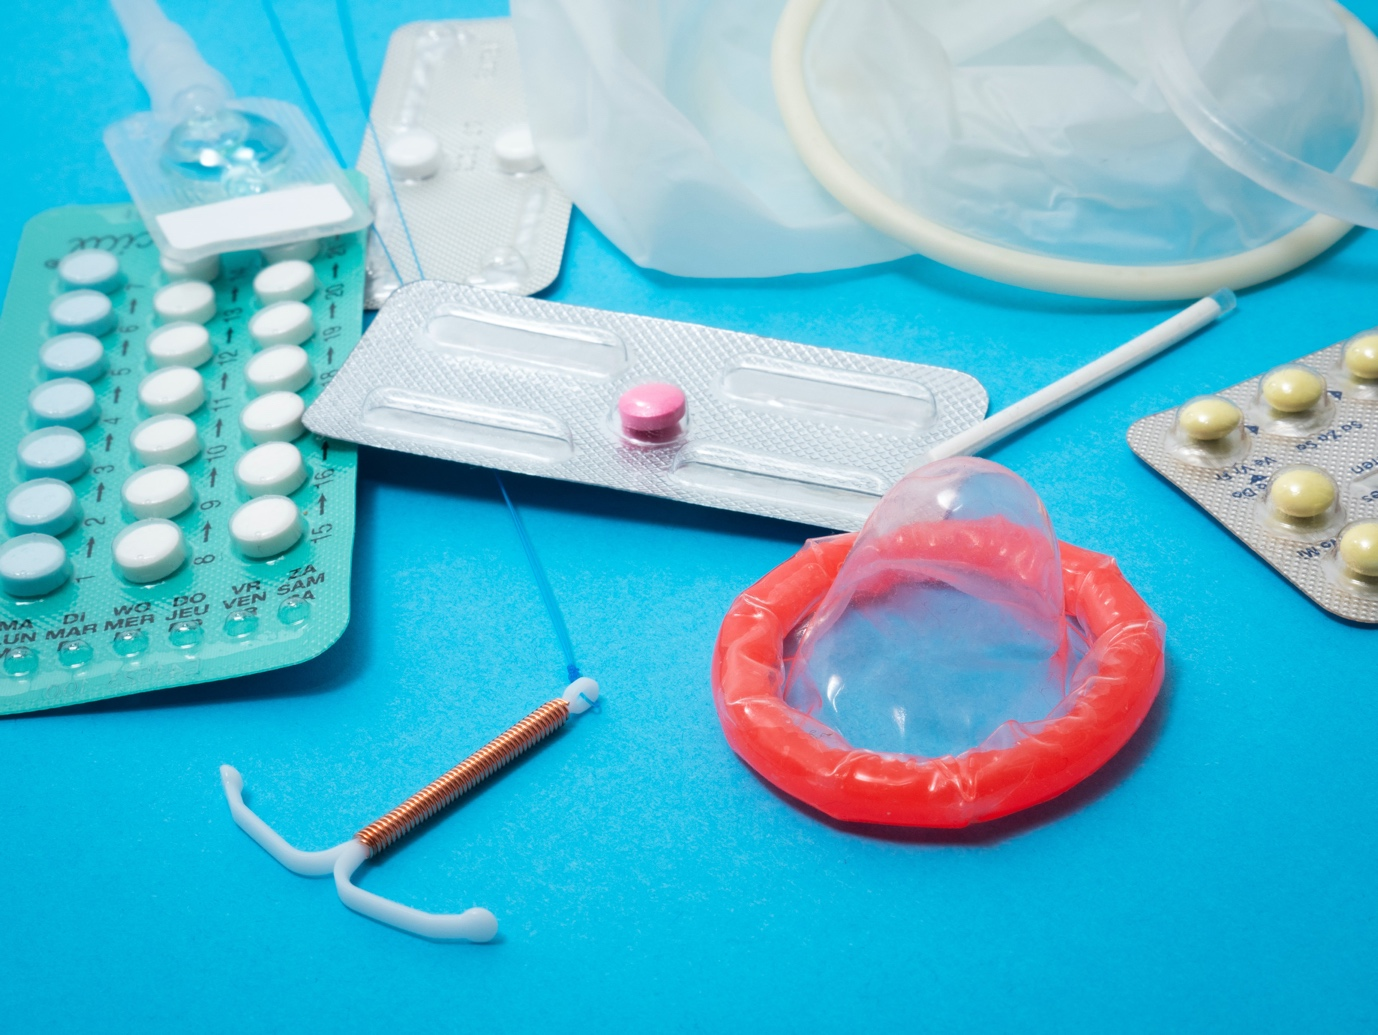 Different types of contraceptives for safe sex